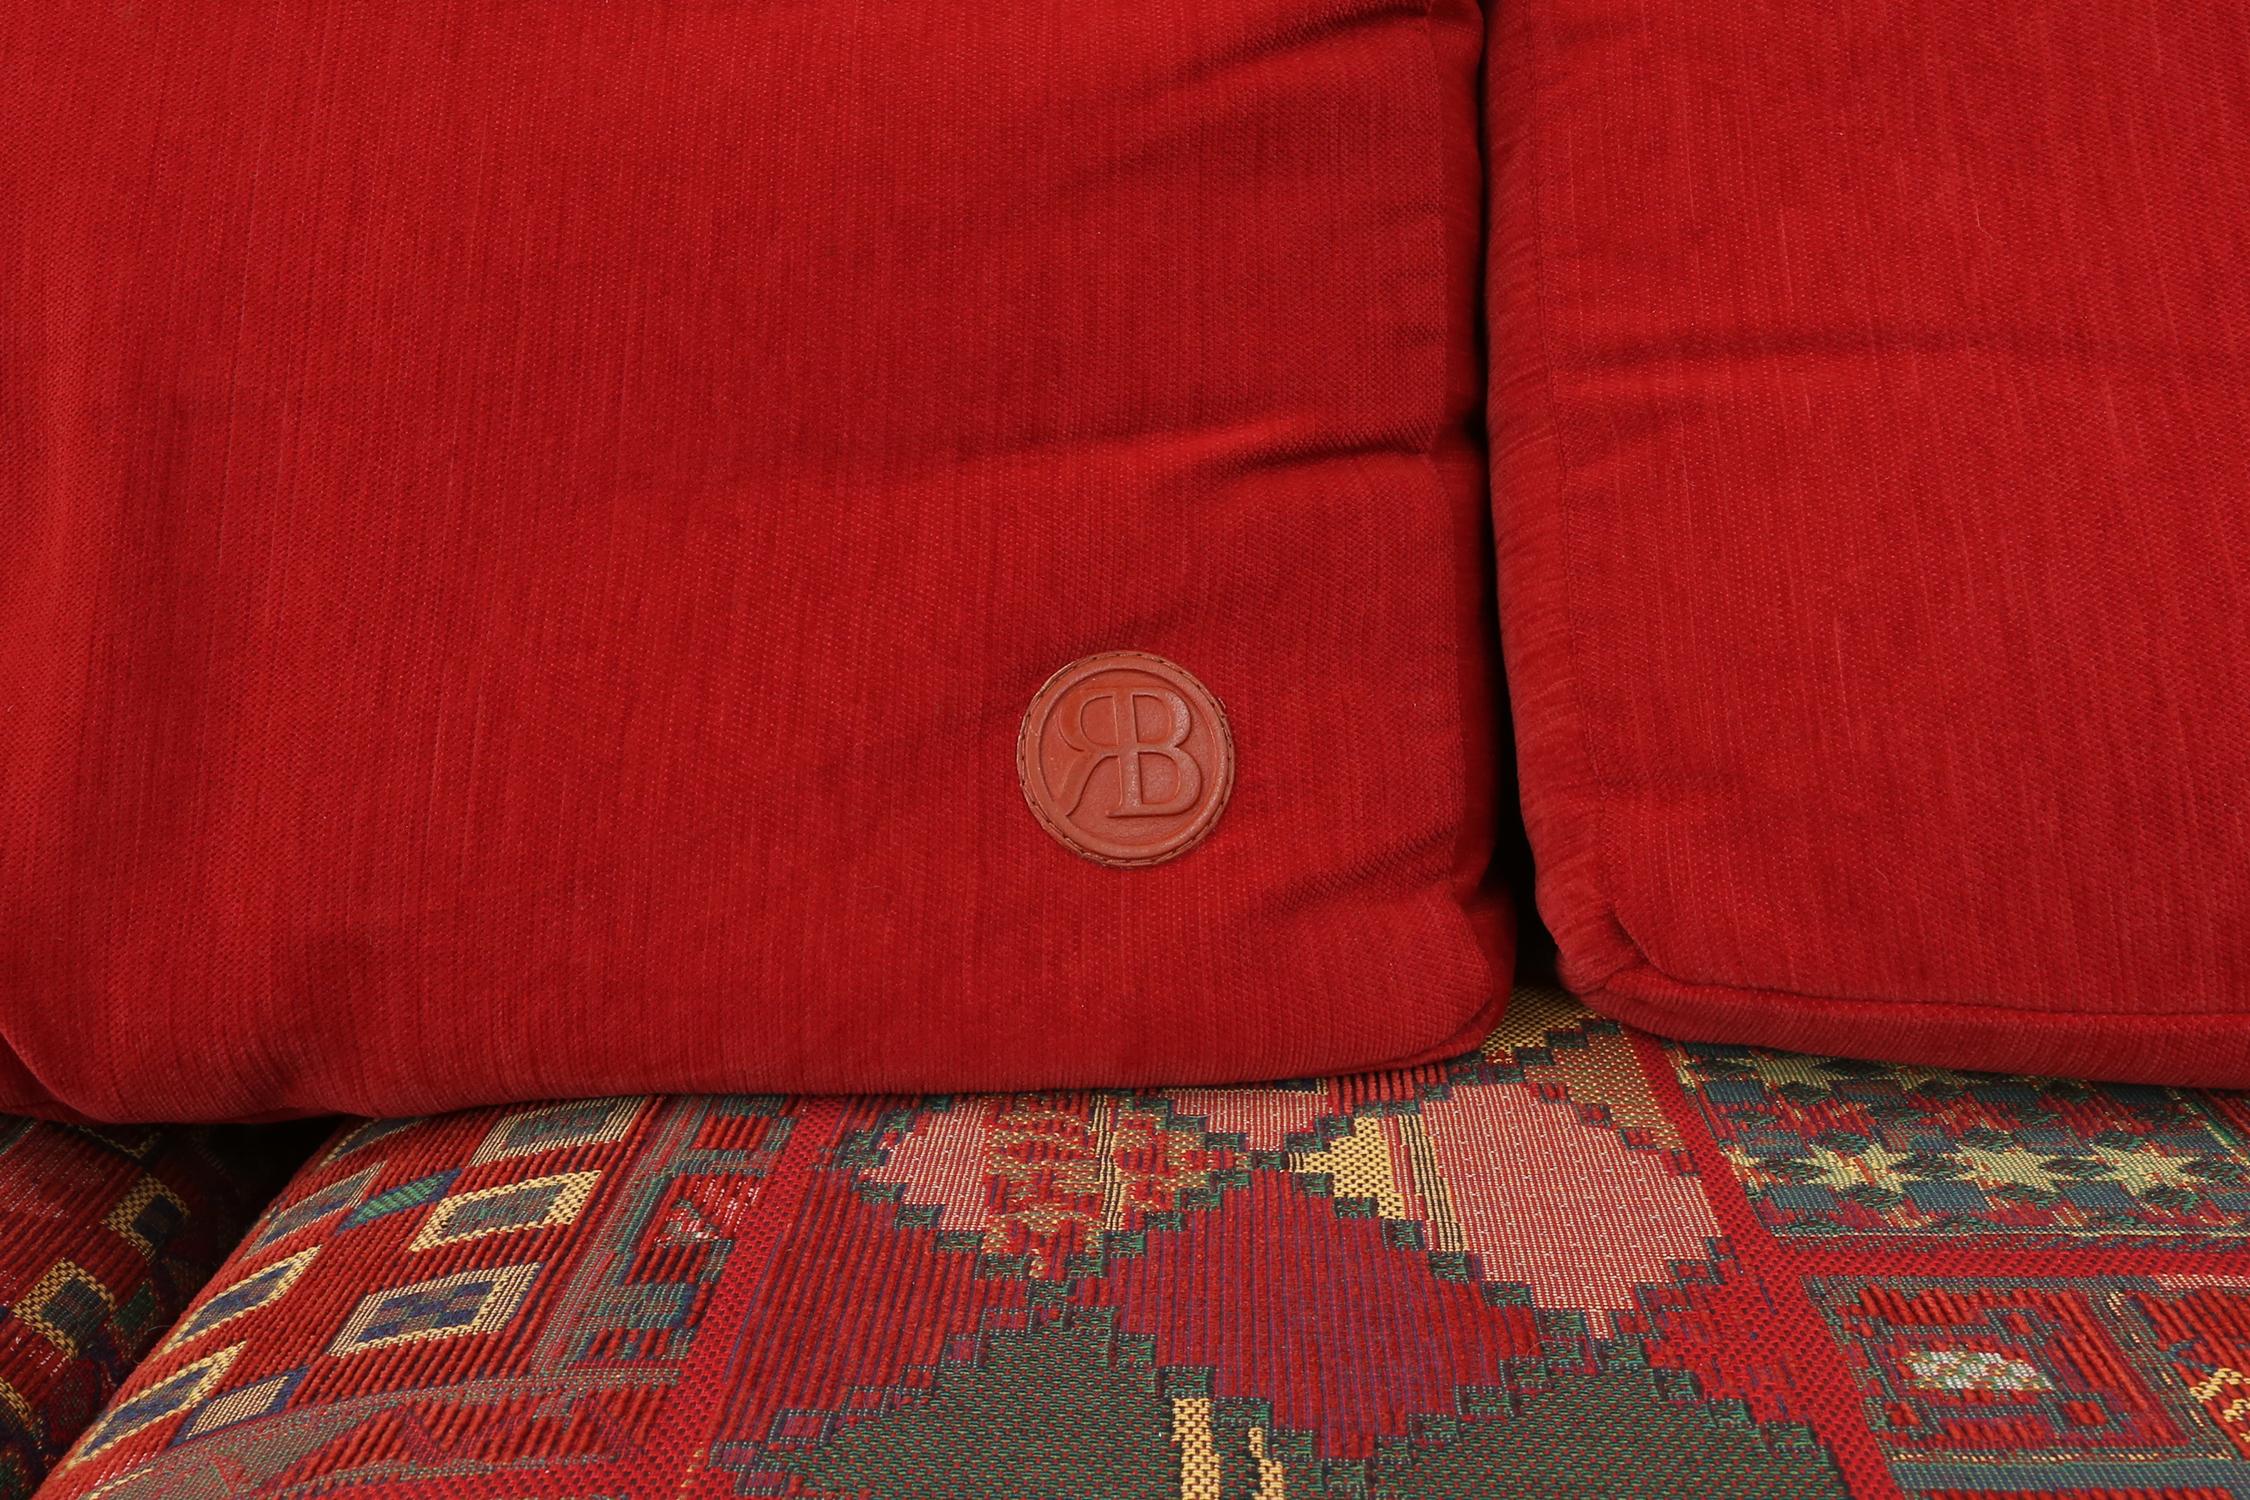 Roche Bobois modular sofa in red and patterned upholstery 1980 For Sale 7